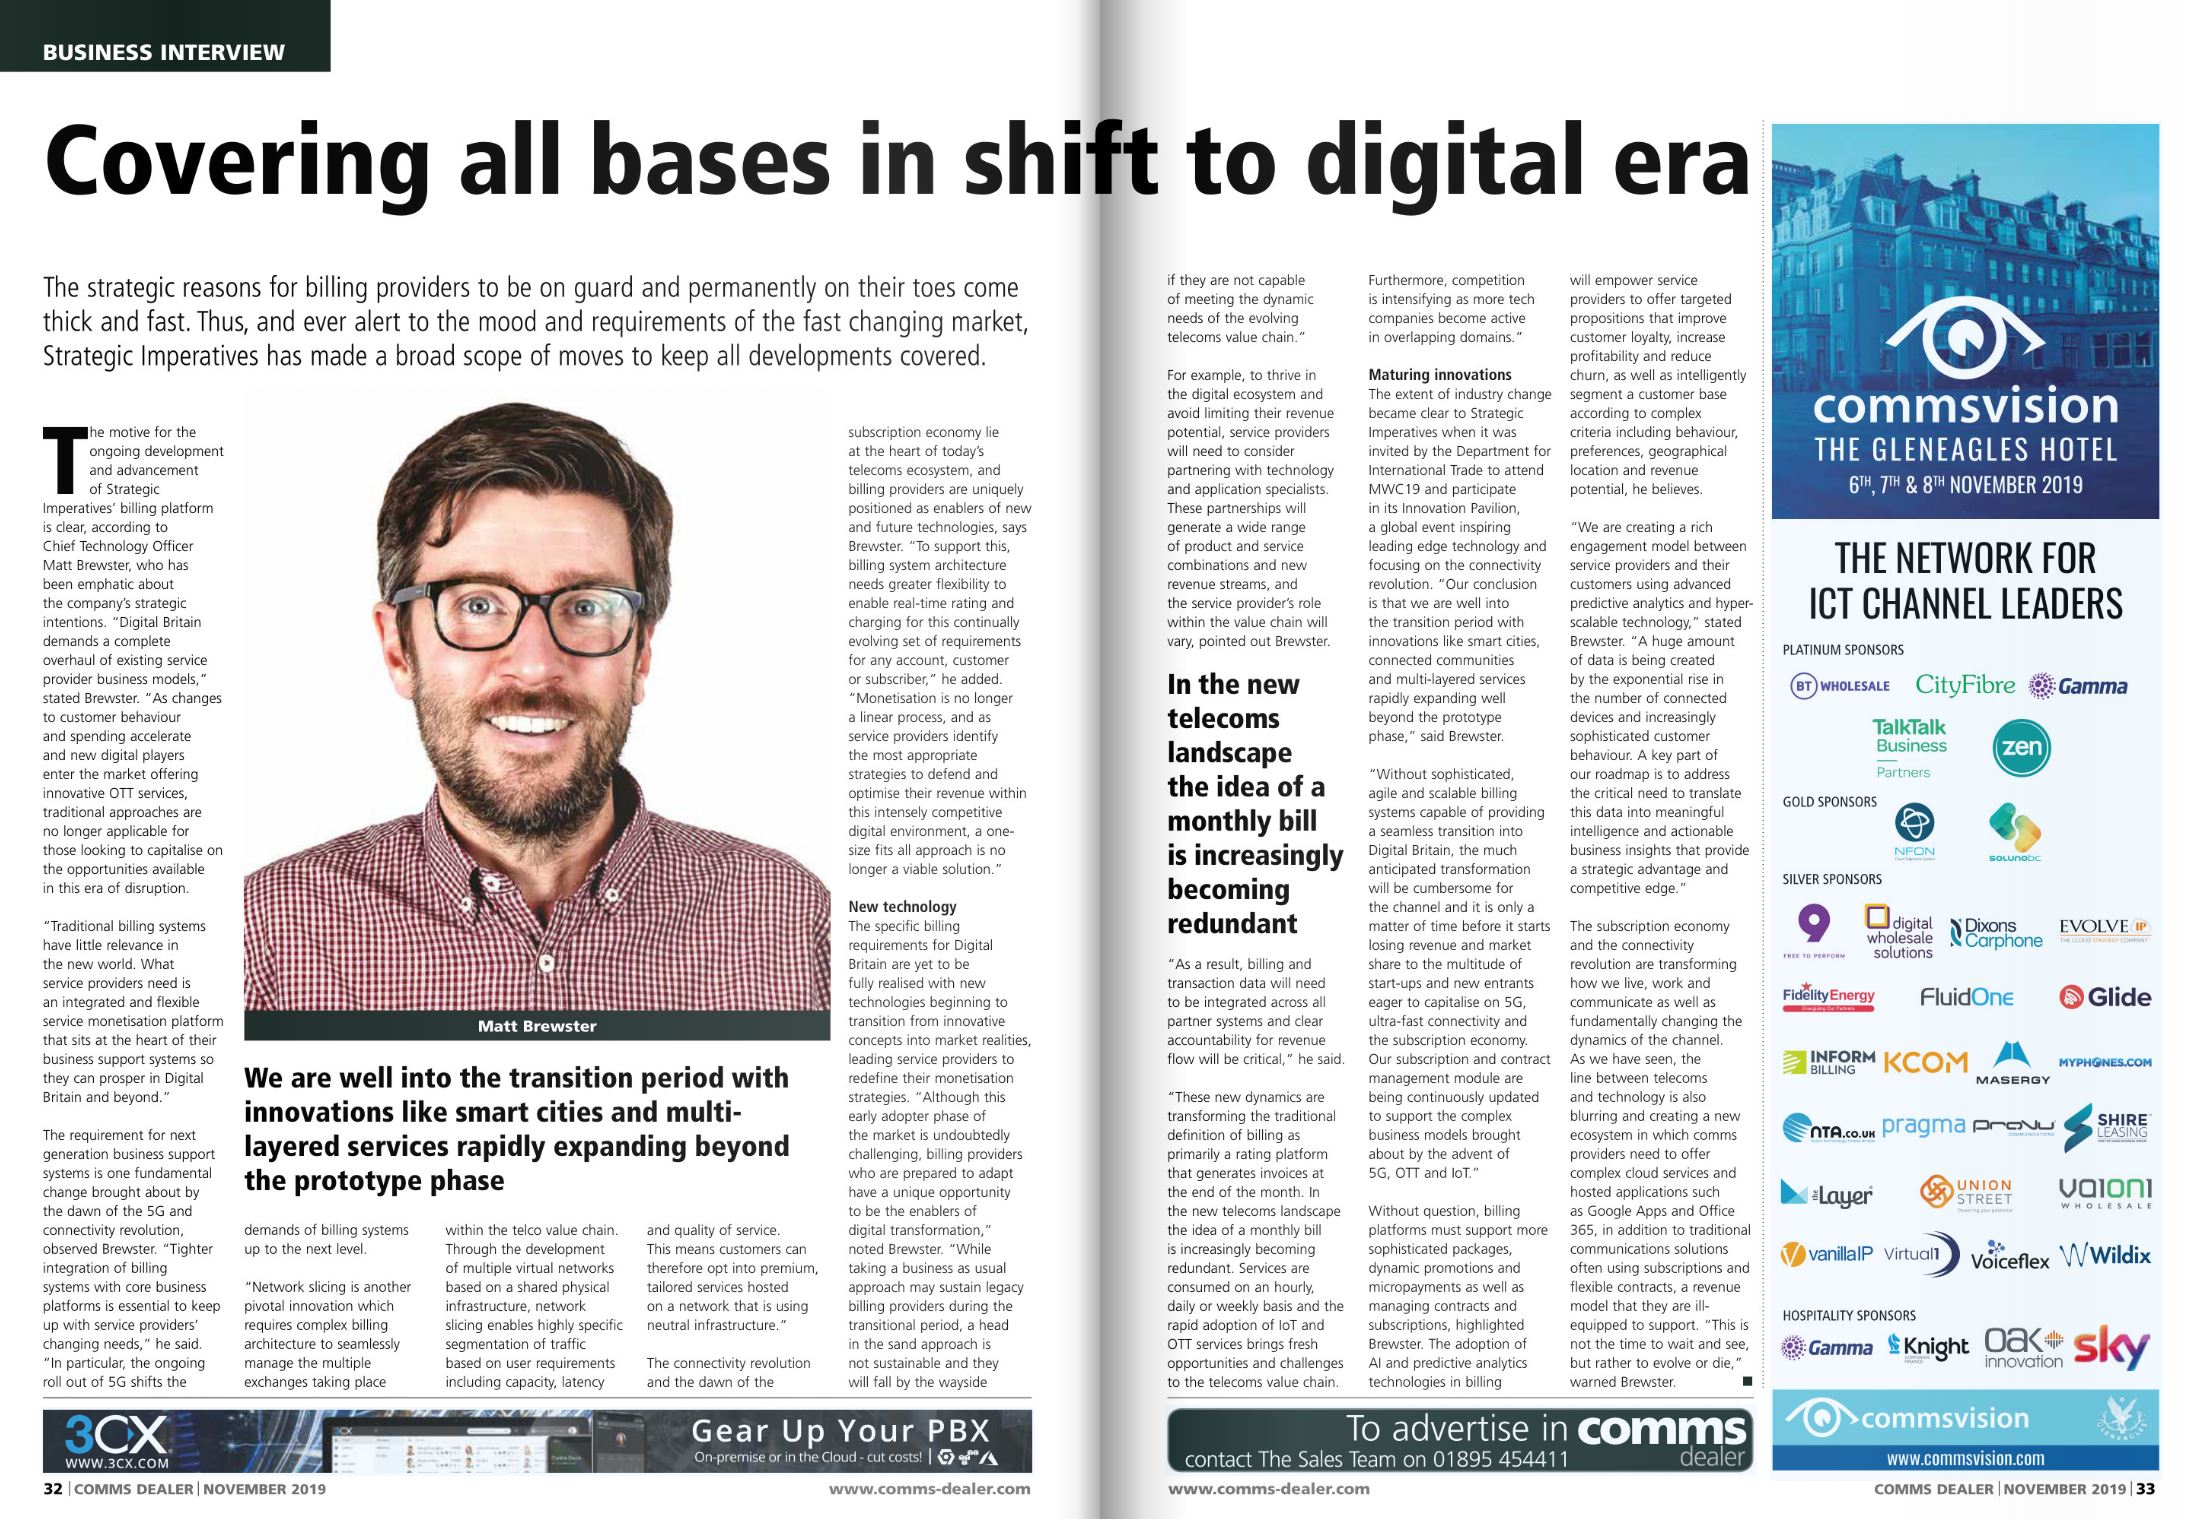 Covering all bases in shift to digital era